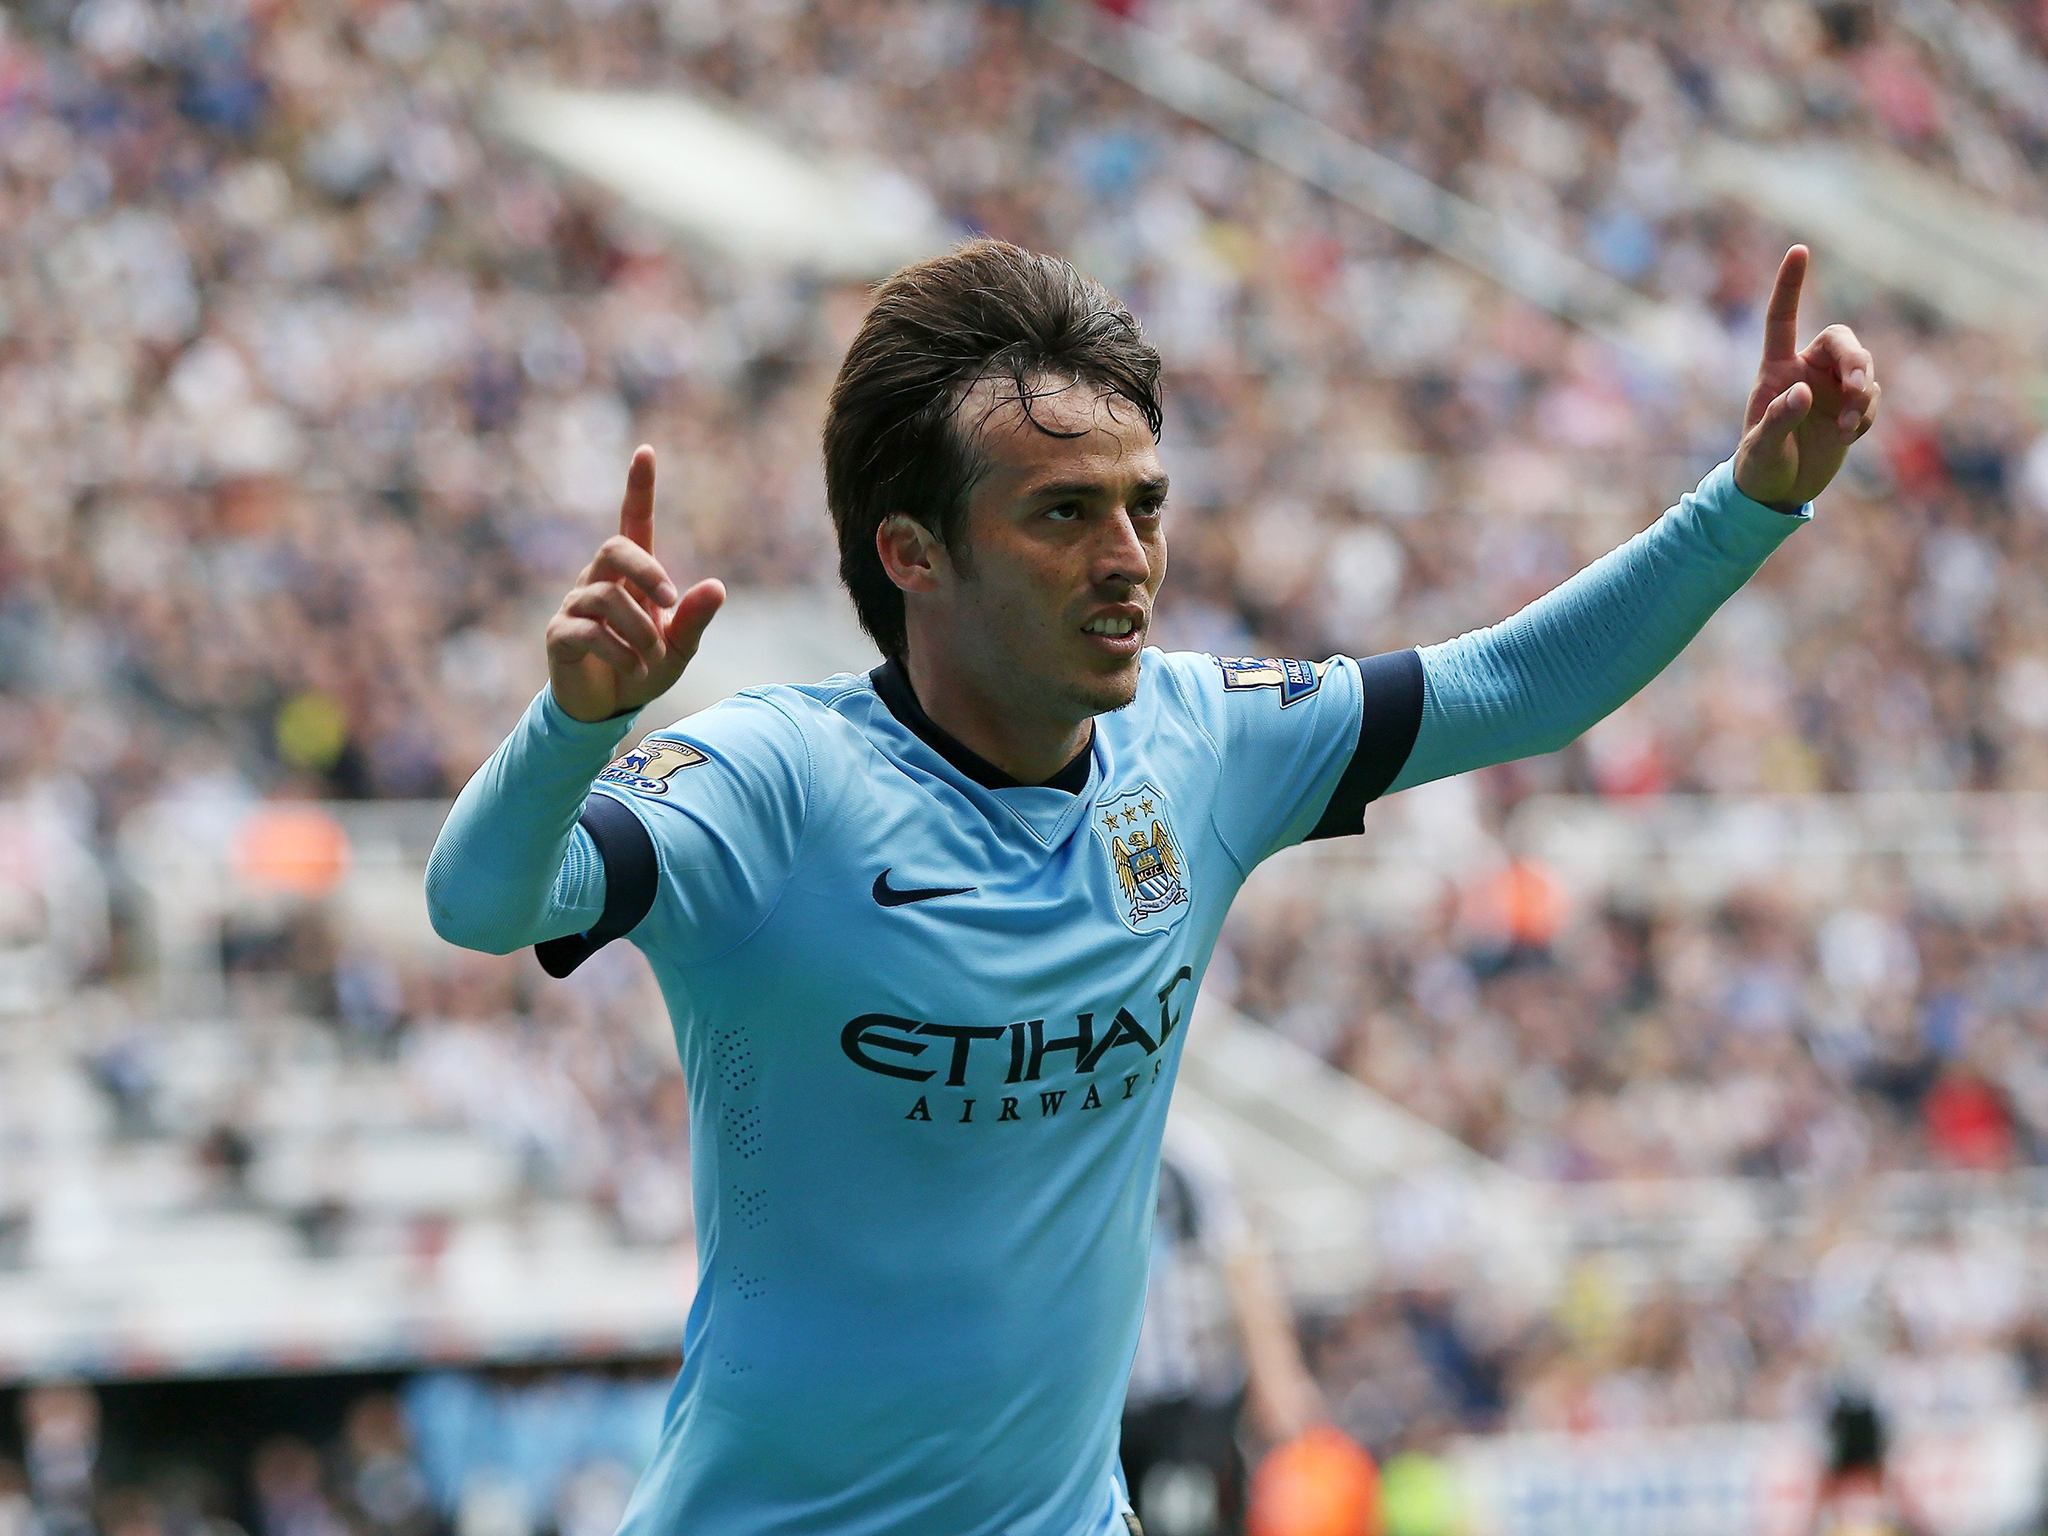 David Silva Wallpapers Images Photos Pictures Backgrounds